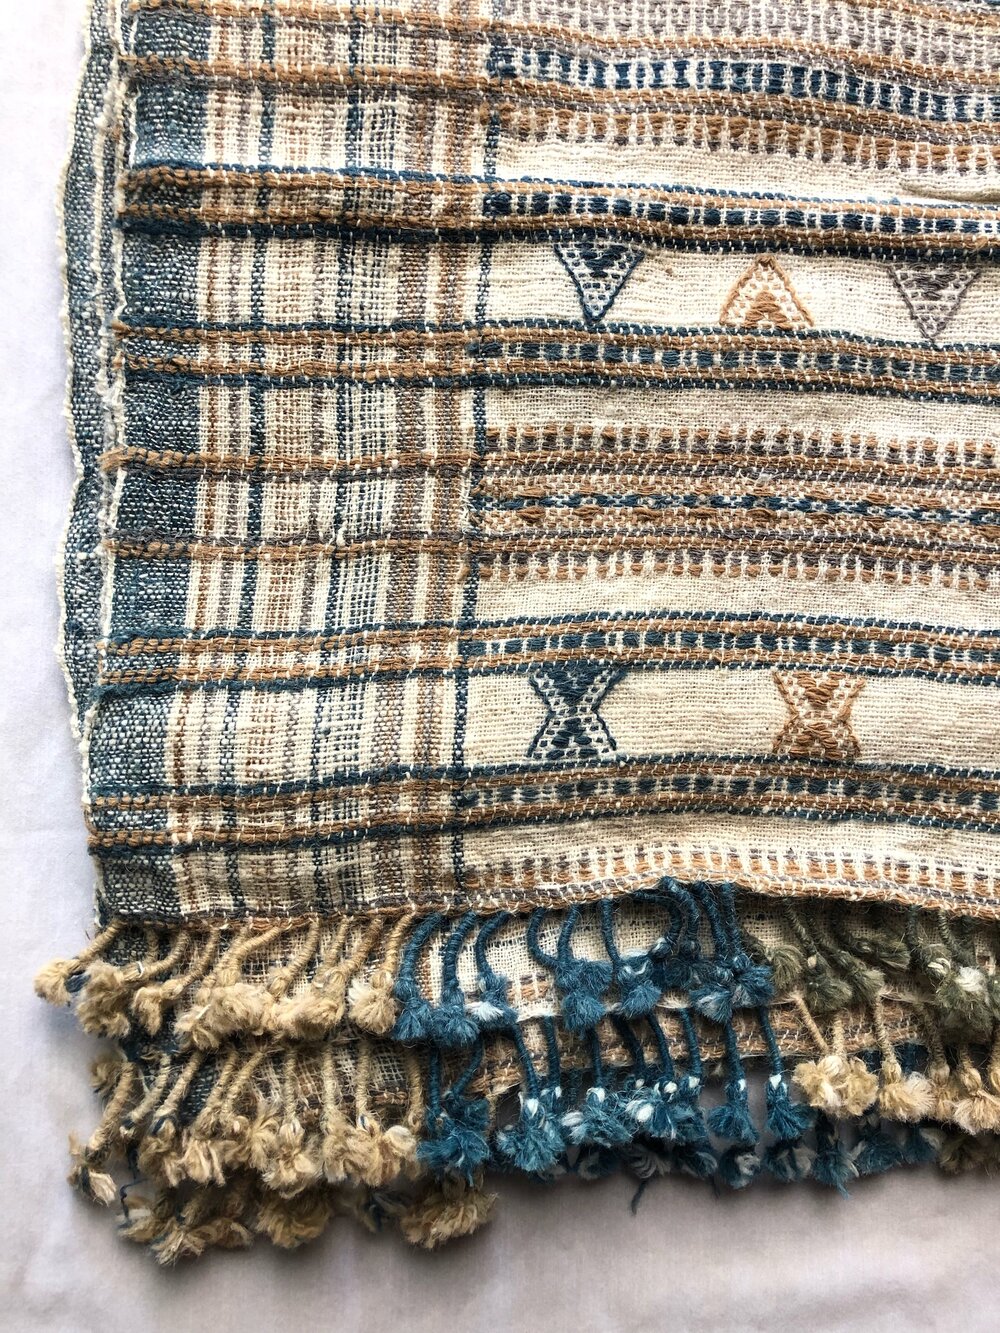 Kennedy Rose Interiors is a curated vintage rug shop offering a  highly-curated collection of one-of-a-kind, hand-knotted, antique, and  vintage rugs with a focus on timeless design, sustainability, authenticated  quality, and rich histories.